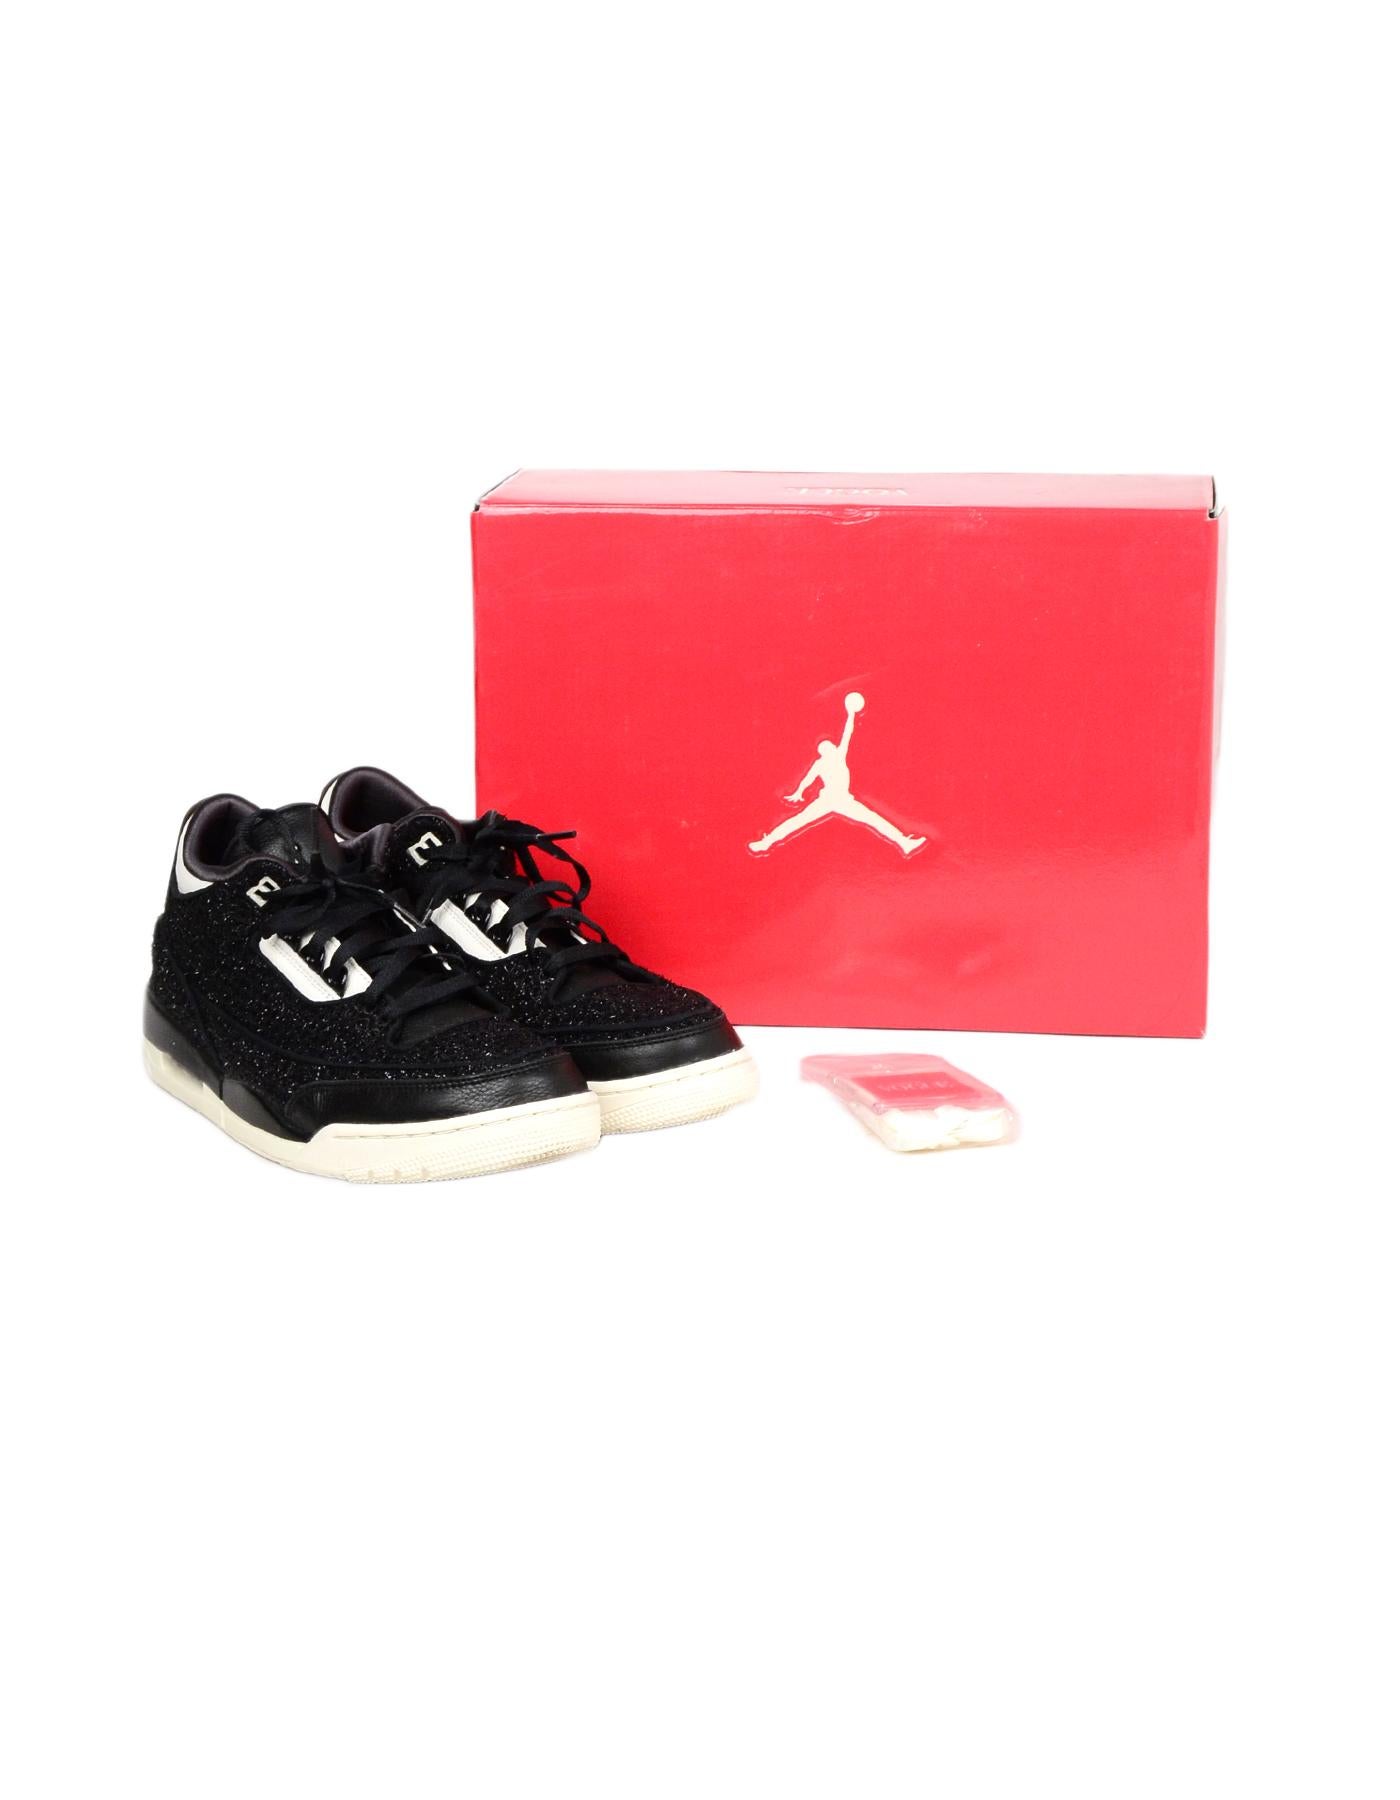 Nike Women's Black Boucle Jordan 3 Retro AWOK Vogue Sneakers Sz 11 W/ Box

Made In: China
Color: Black, white
Hardware: Black
Materials: Boucle, rubber
Closure/Opening: Lace up front 
Overall Condition: Excellent pre-owned condition with exception